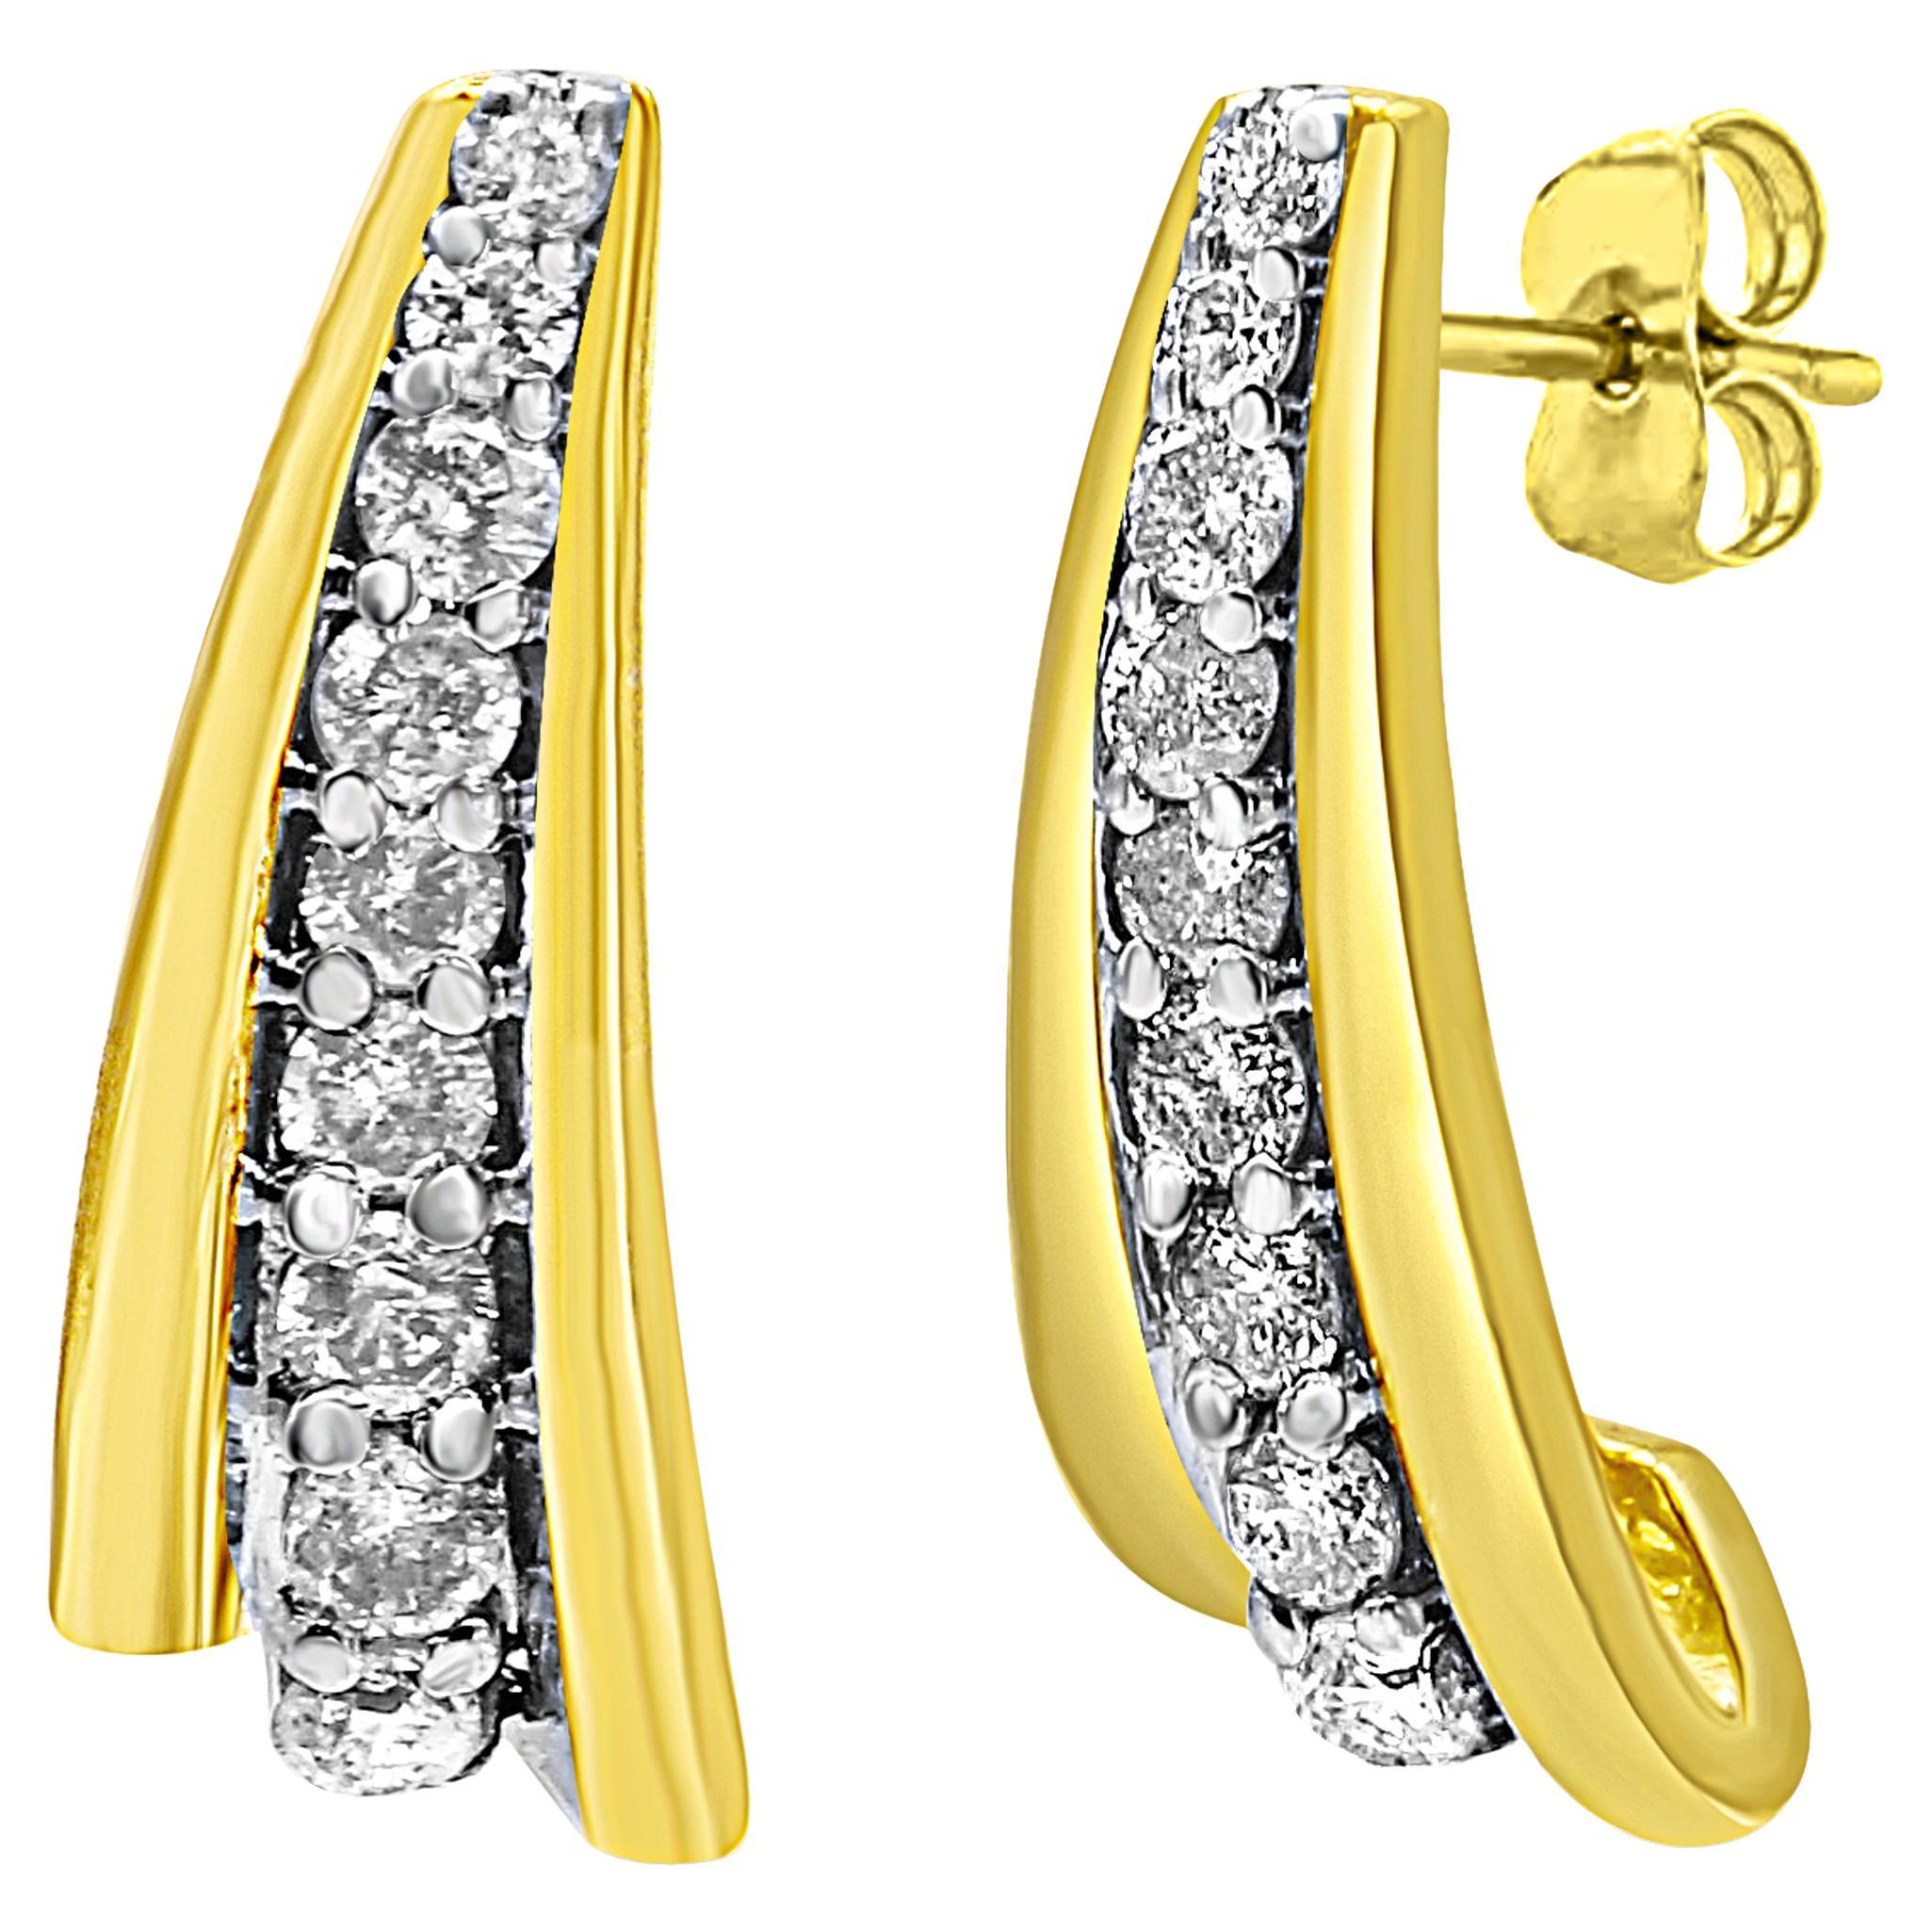 10K Yellow Gold Plated Sterling Silver 1.0 Carat Diamond Huggie Earrings For Sale